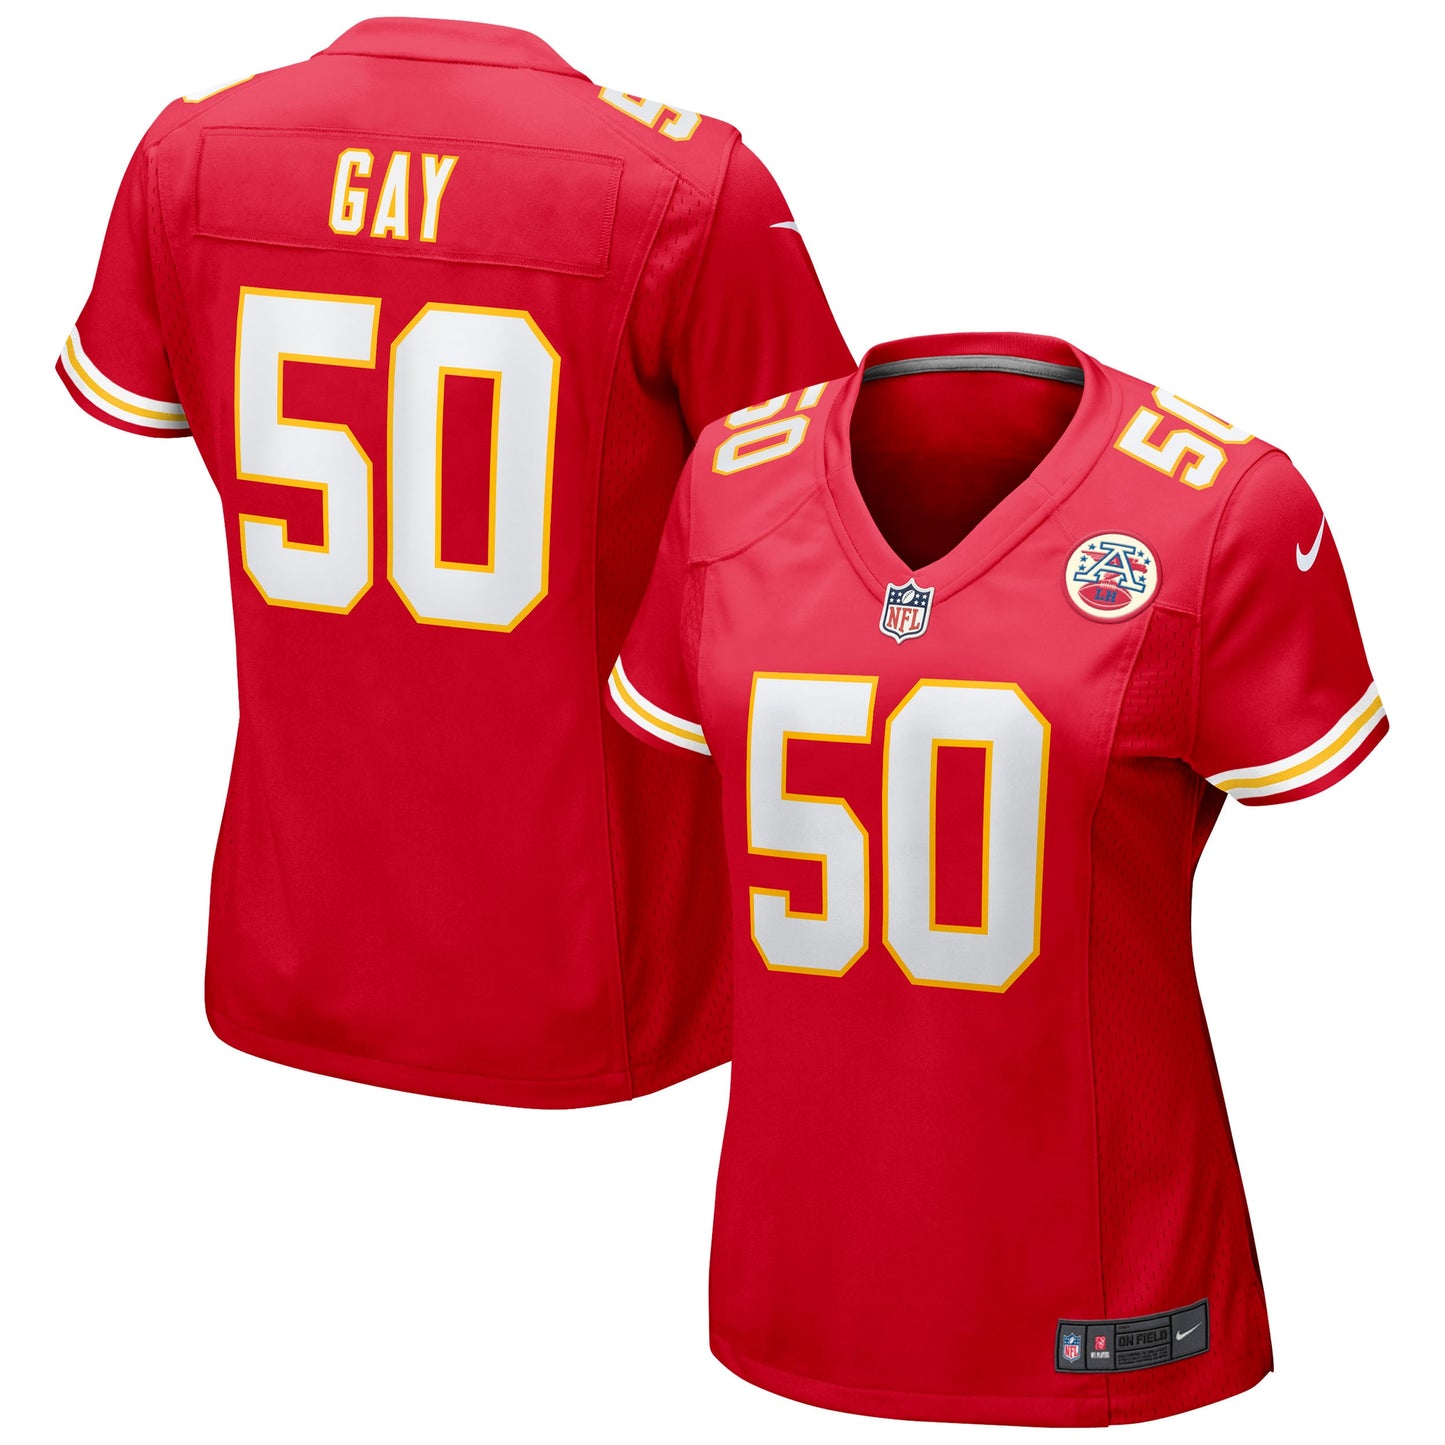 Willie Gay Kansas City Chiefs Nike Women's Game Jersey - Red